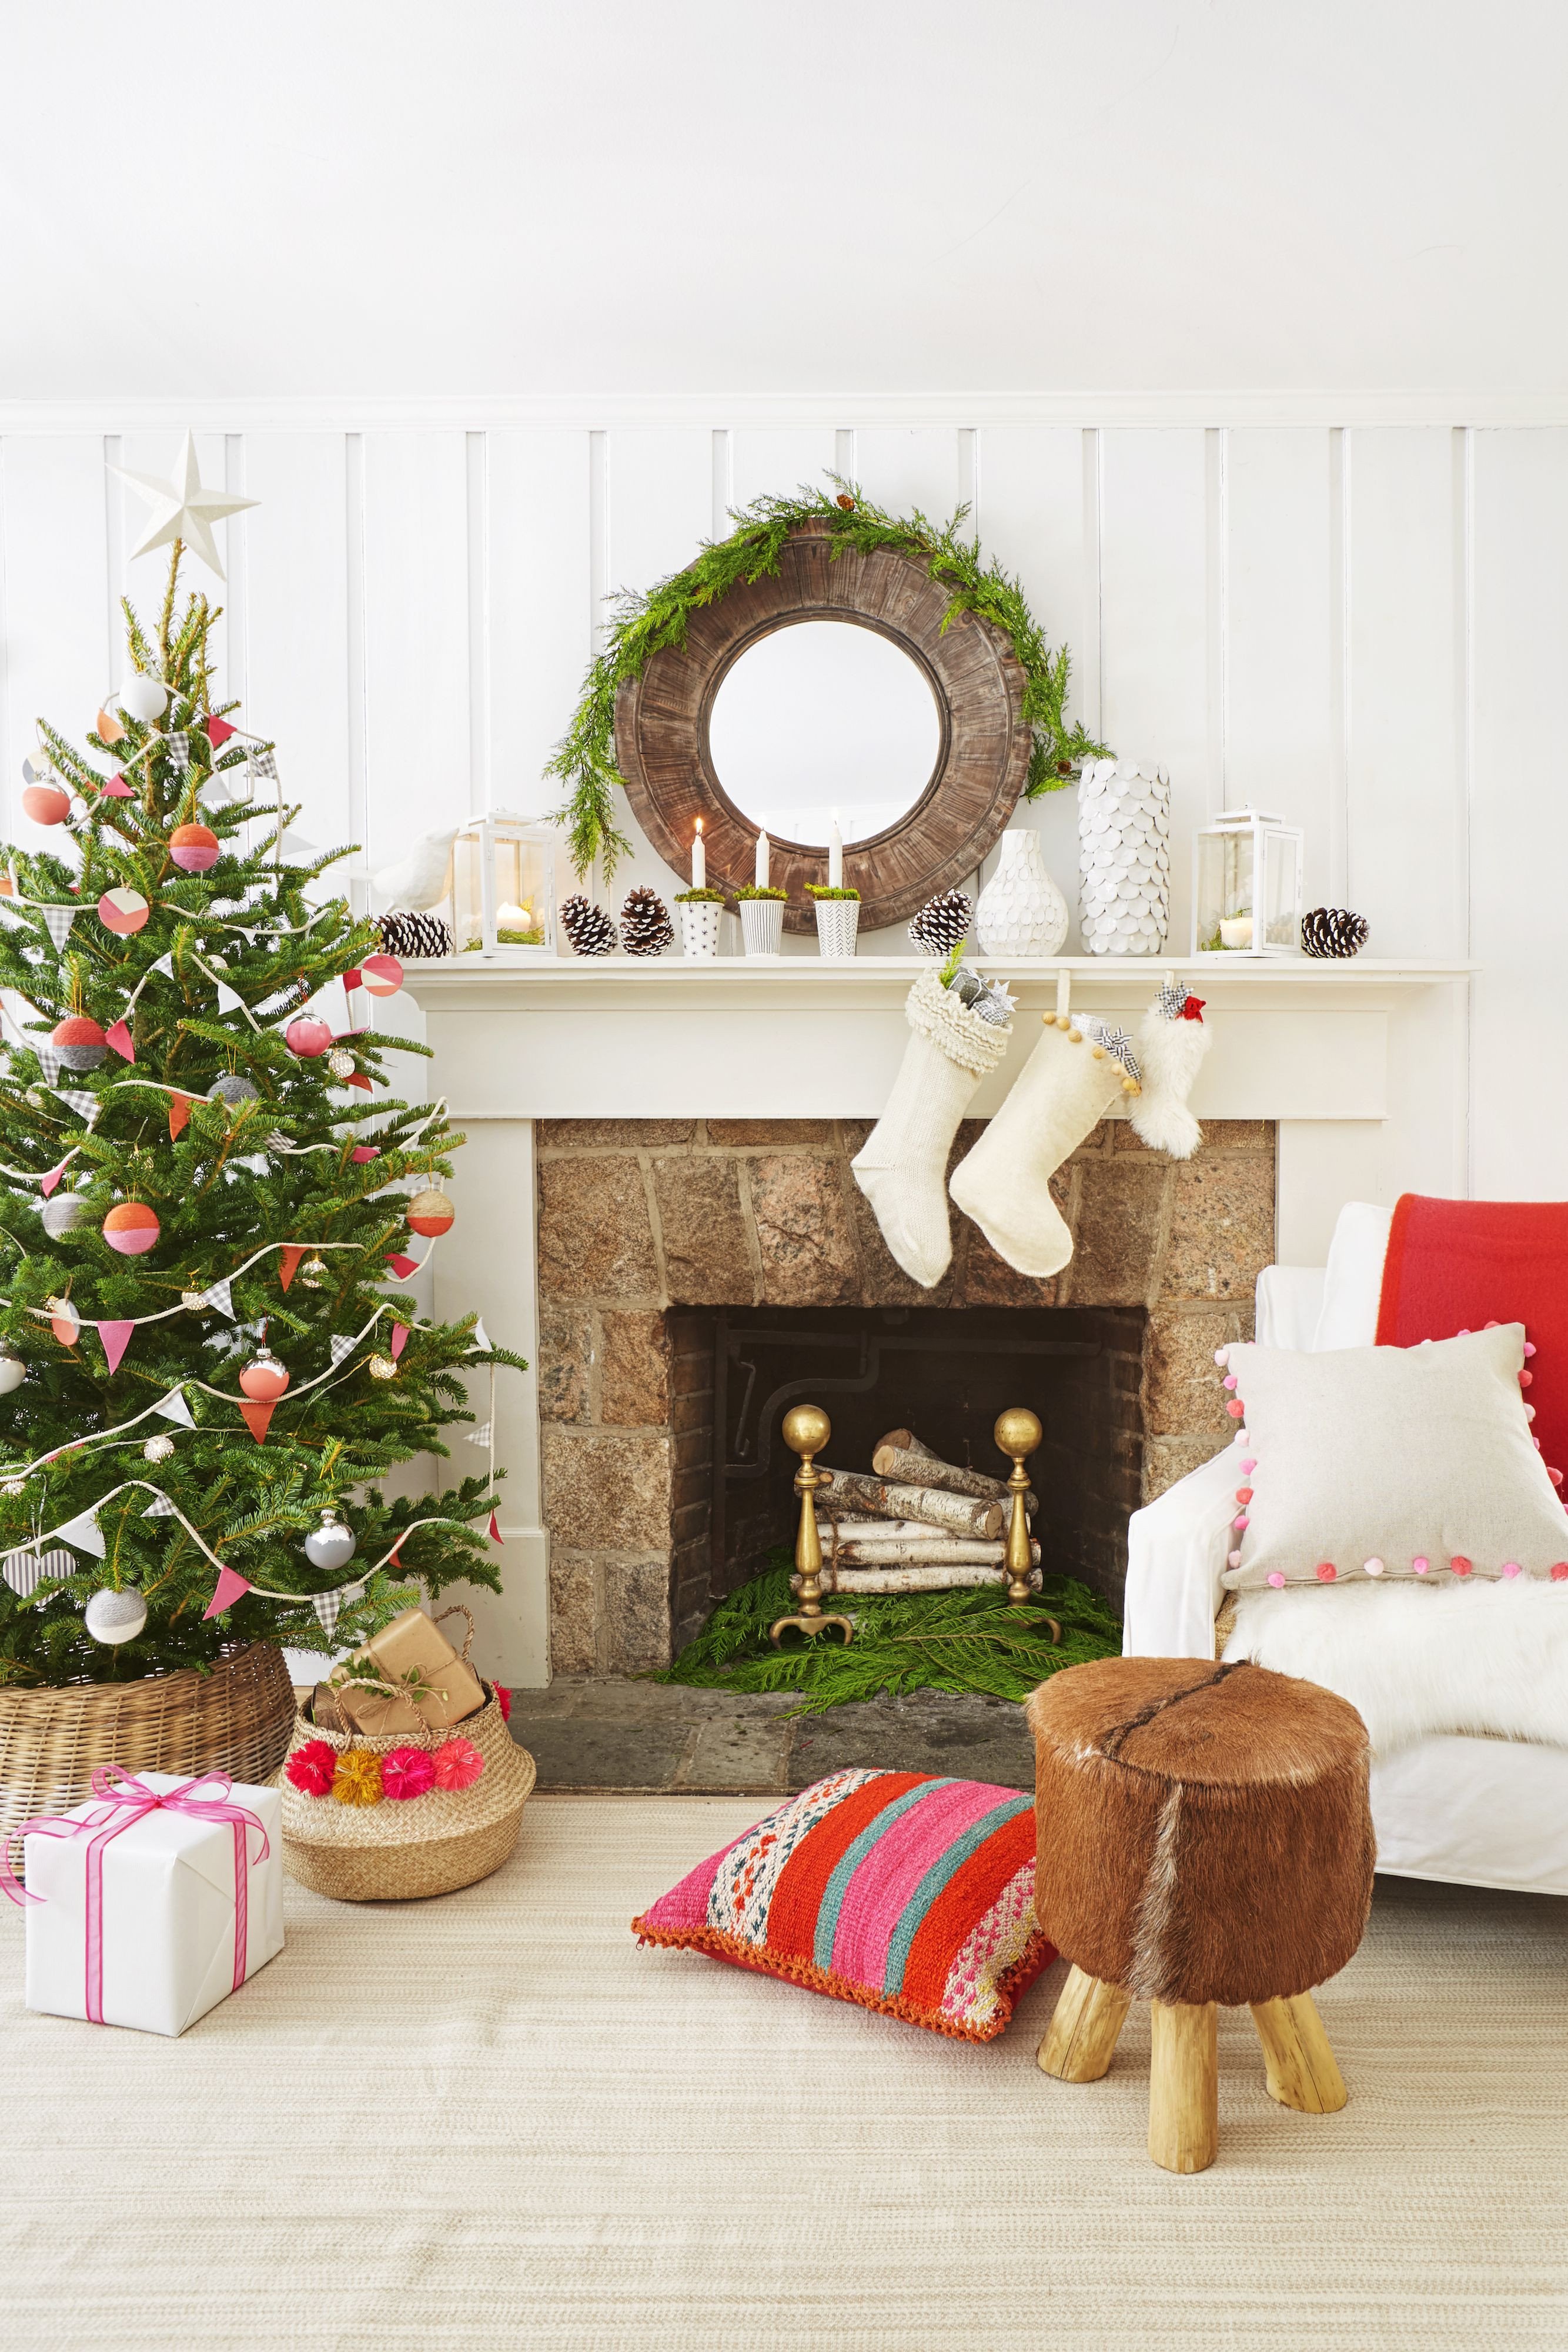 Christmas Bedroom Decorating Ideas Awesome 50 Decorated Christmas Tree Ideas Of Christmas